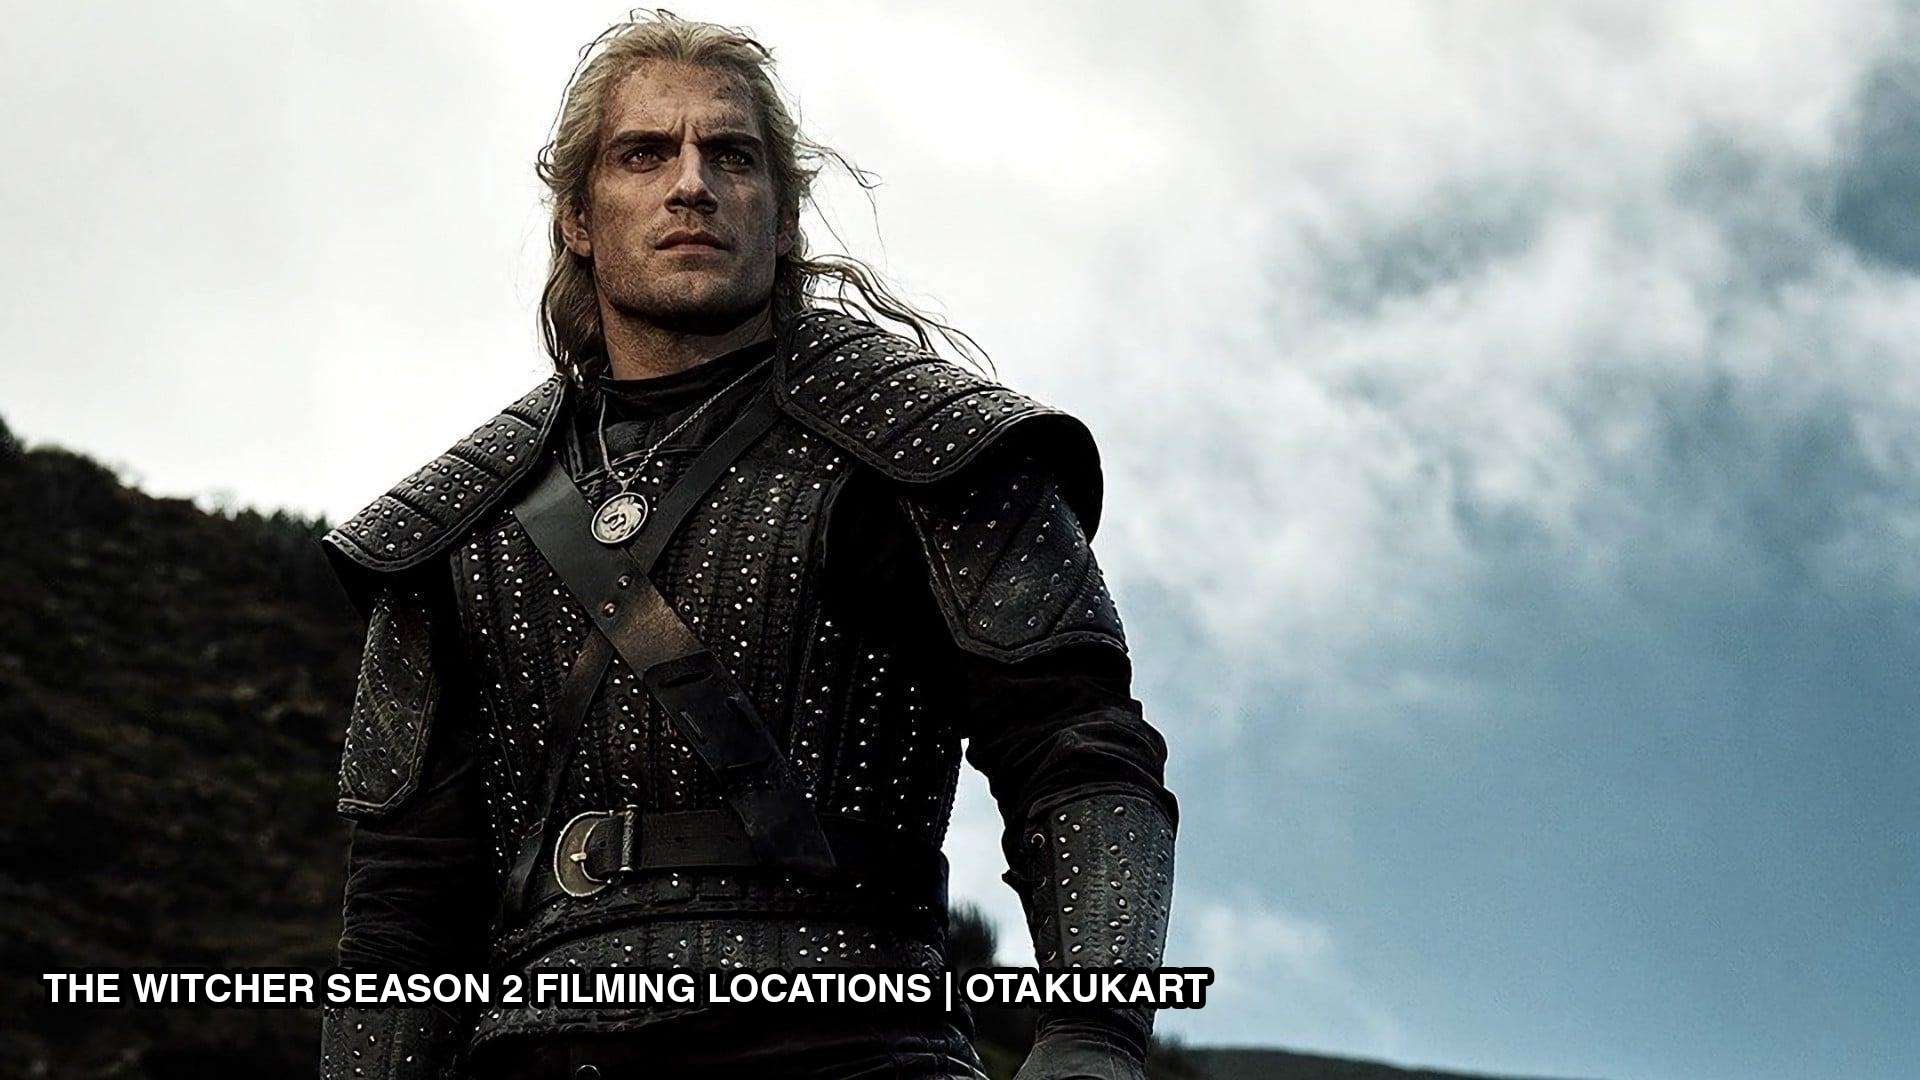 The Witcher Season 2 Filming Locations